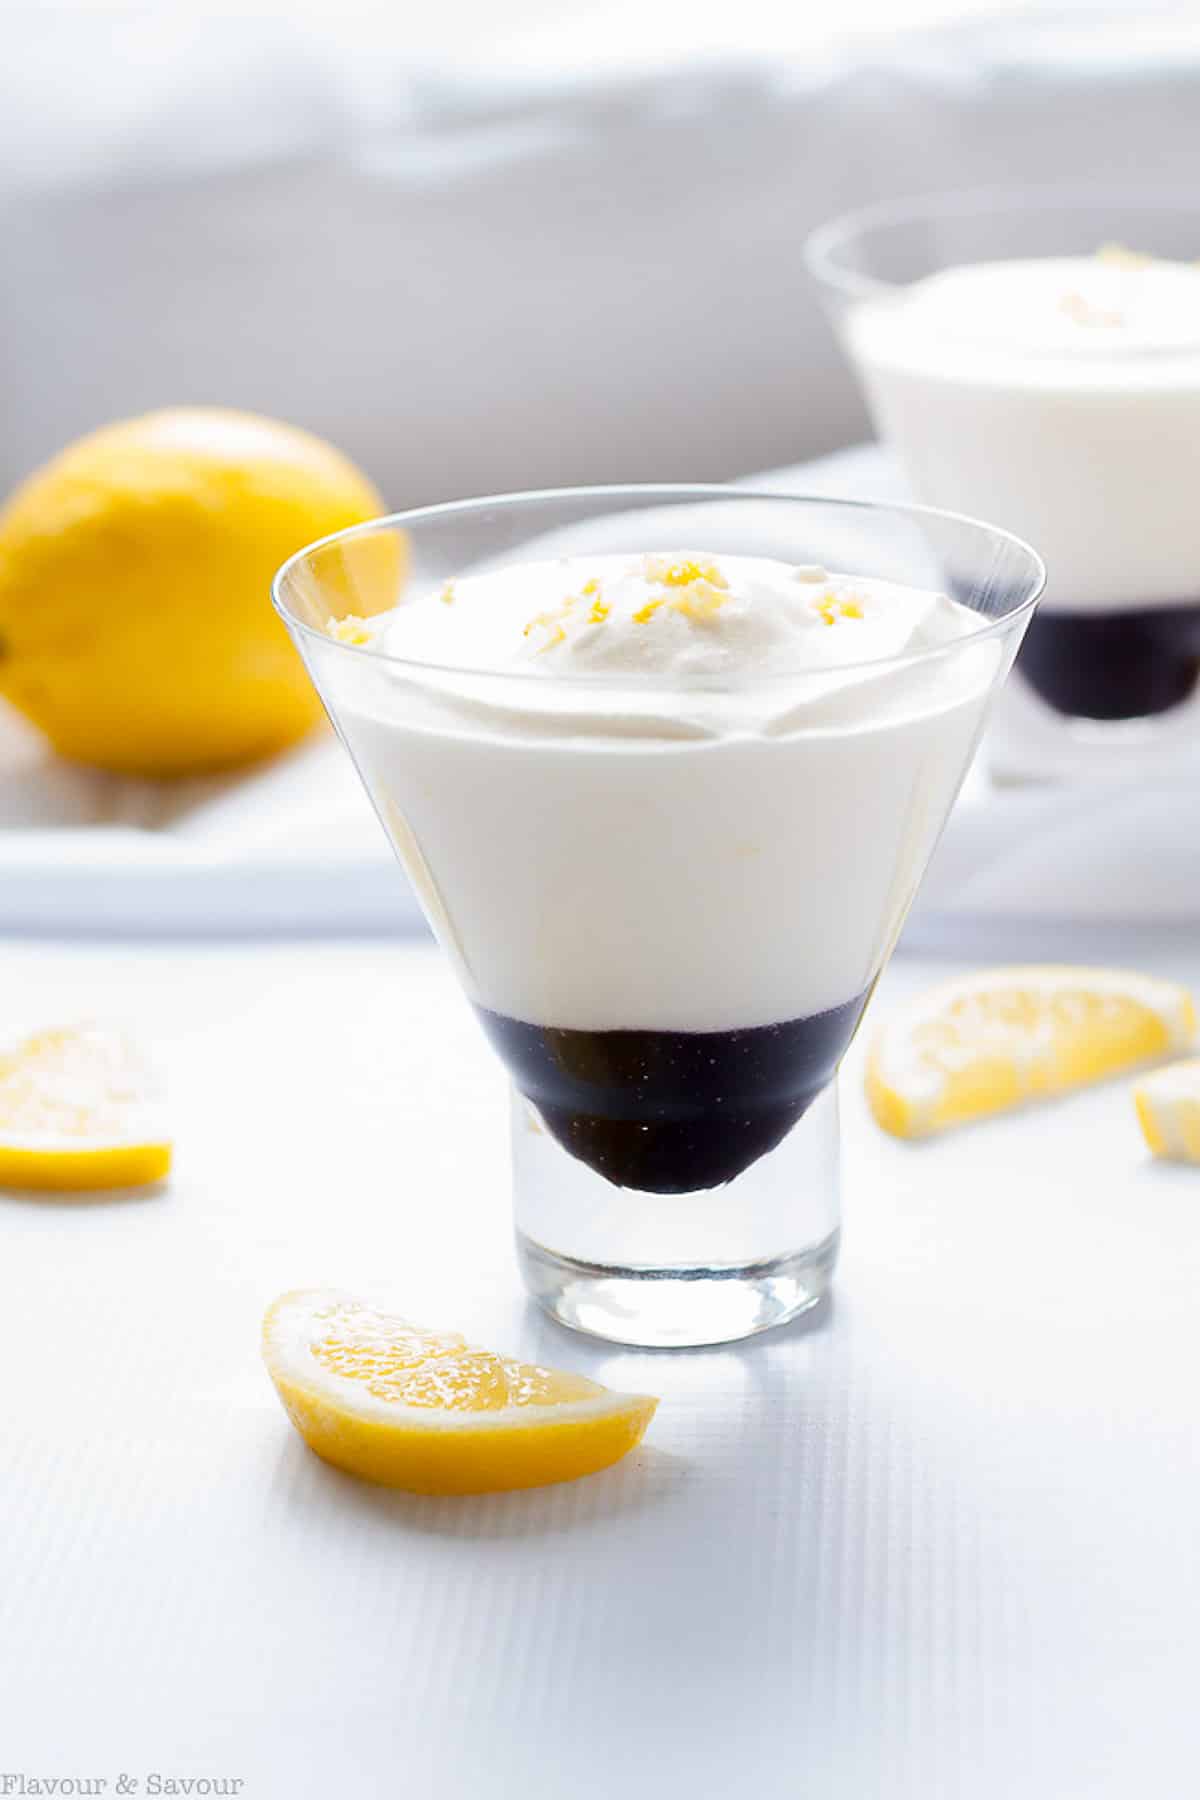 Light lemon mousse with blueberry sauce in a dessert glass garnished with lemon zest.